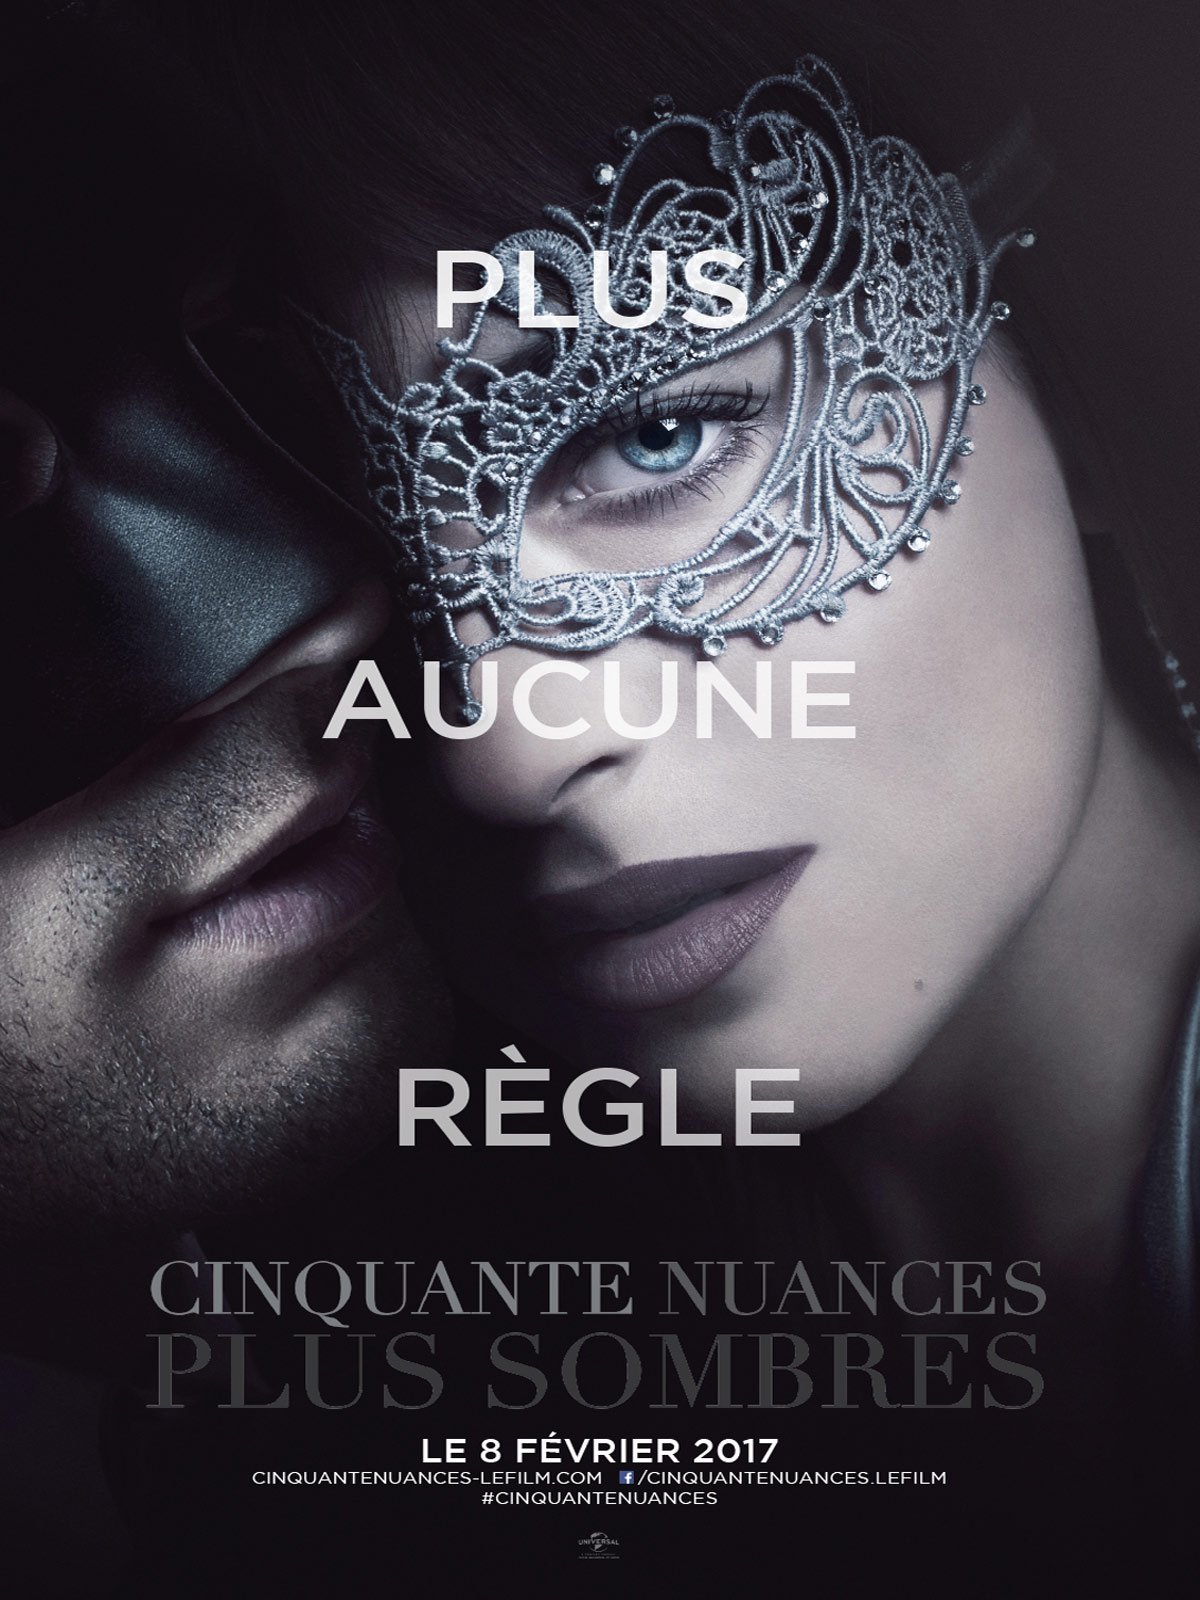 Cinquante nuances plus sombres en anglais meaning of conduent in english